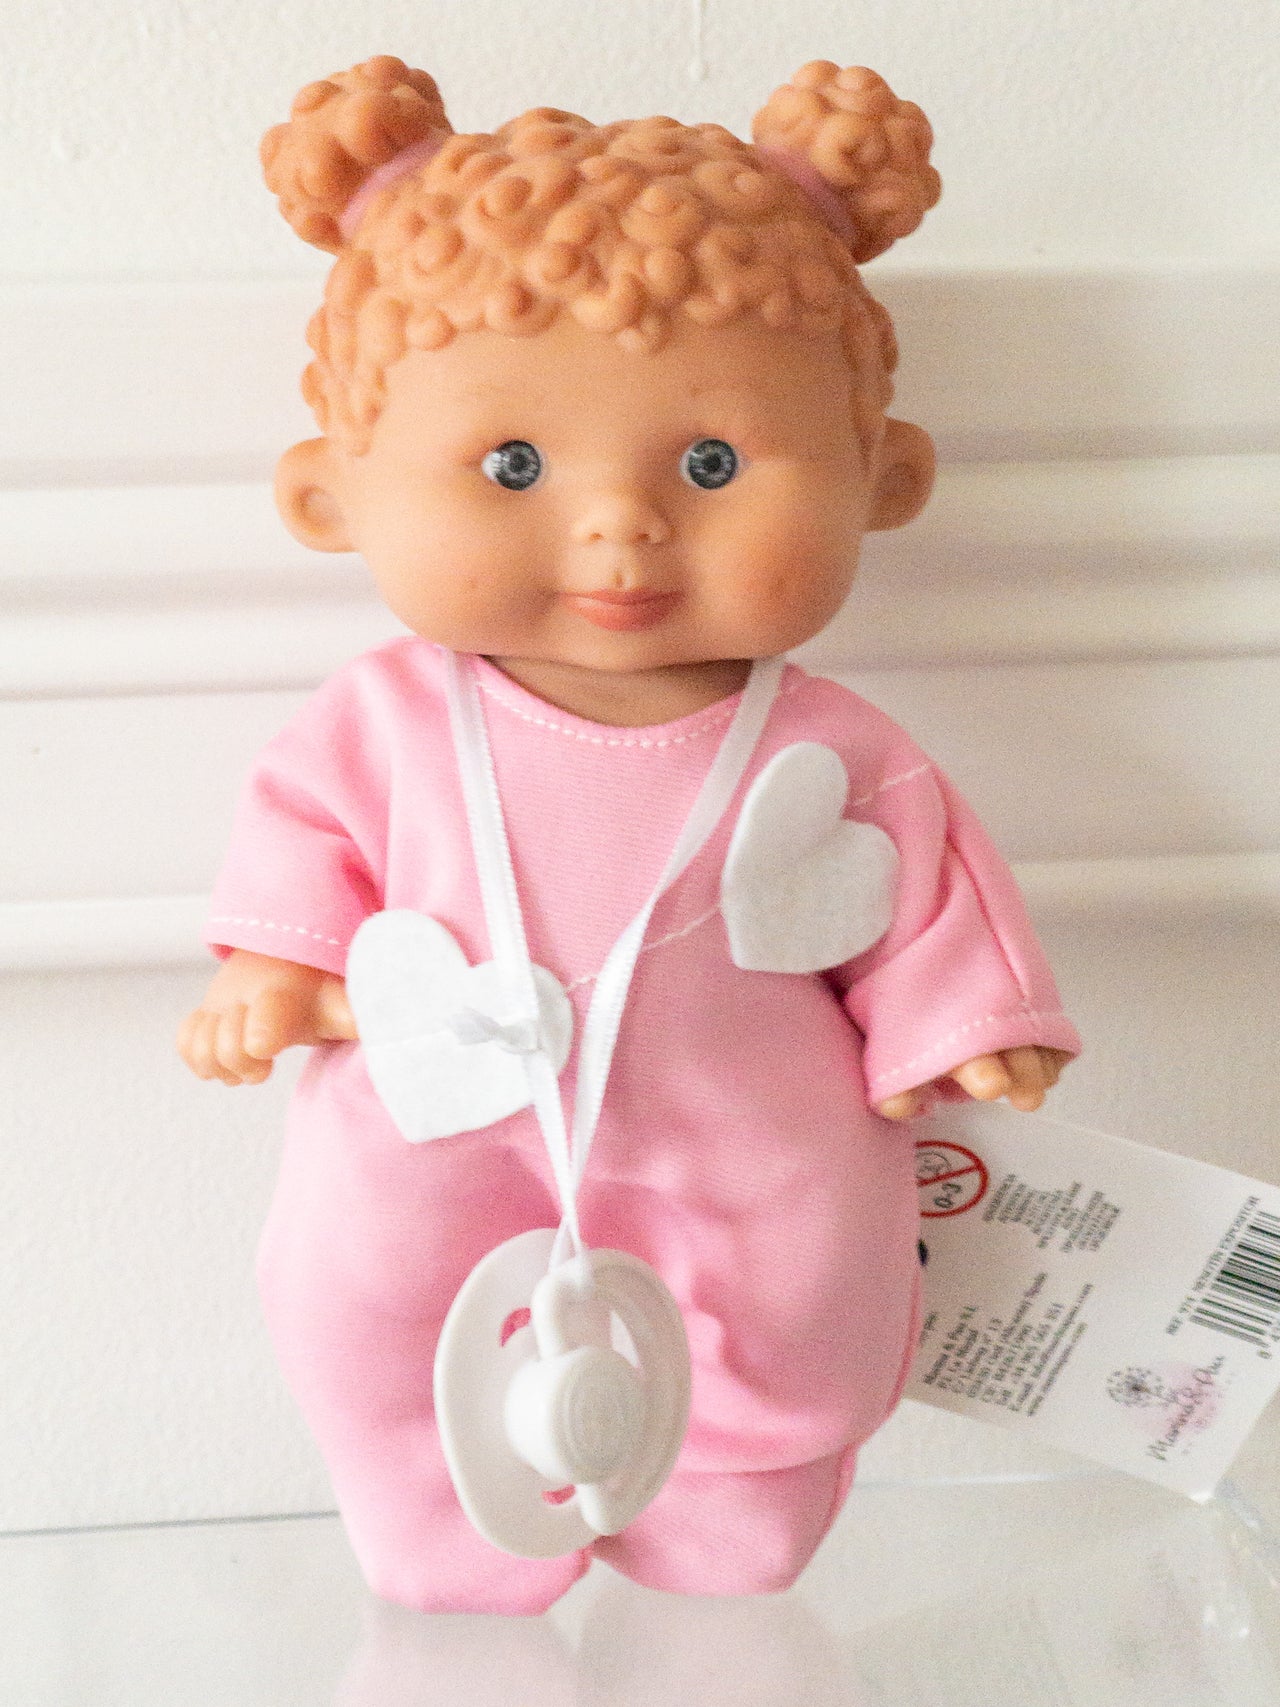 Lainey - 8.2" Nenotin Girl Doll with Pink Heart Romper